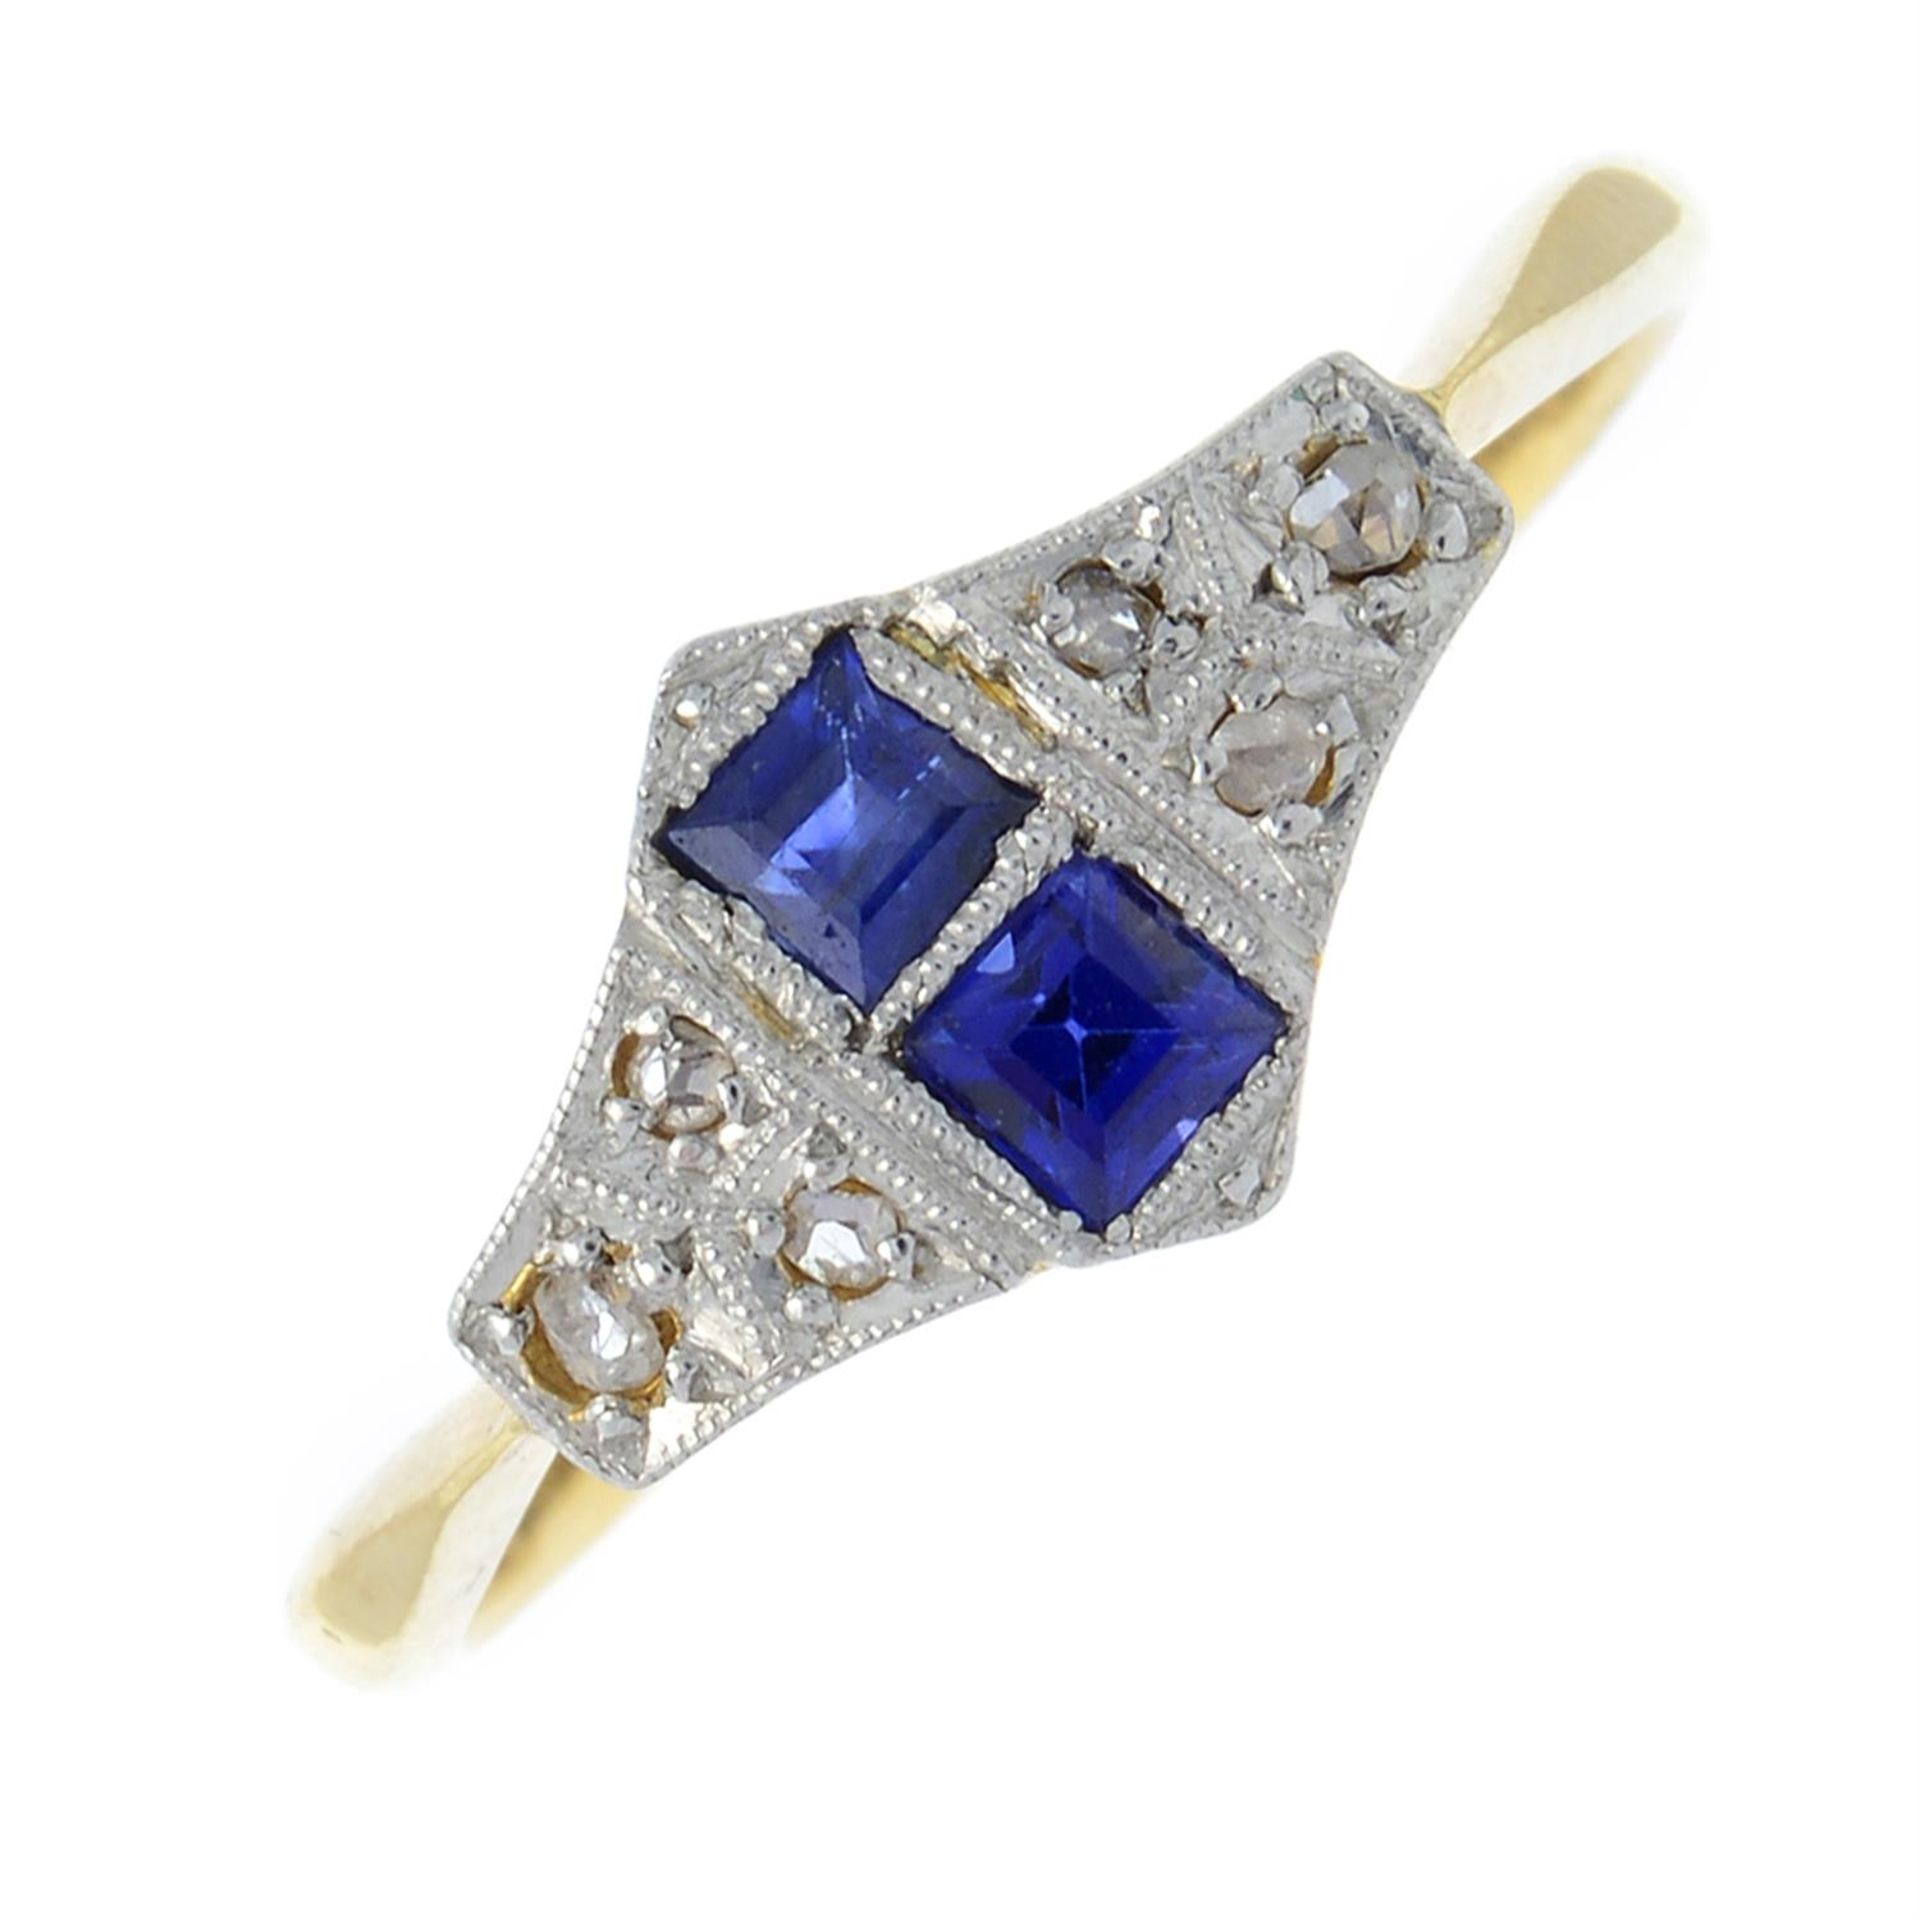 An early 20th century 18ct gold and platinum calibré-cut sapphire and rose-cut diamond cluster ring.